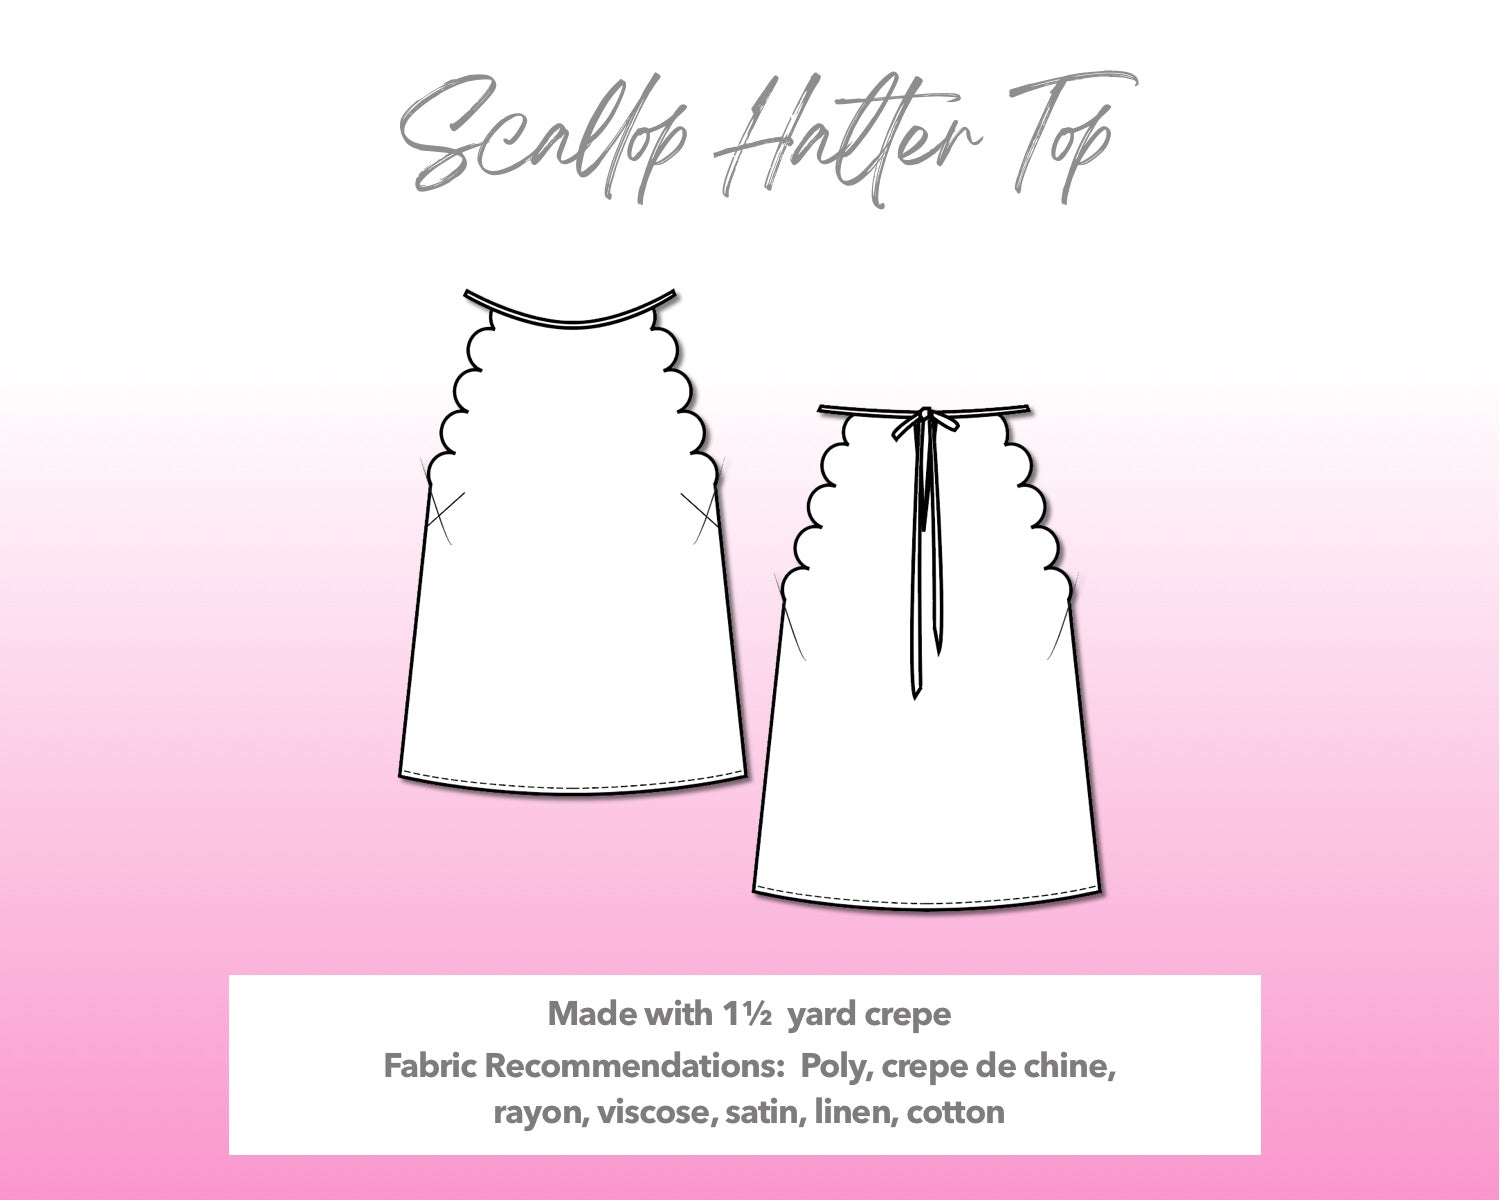 Illustration and detailed description for Scallop Halter Top sewing pattern.